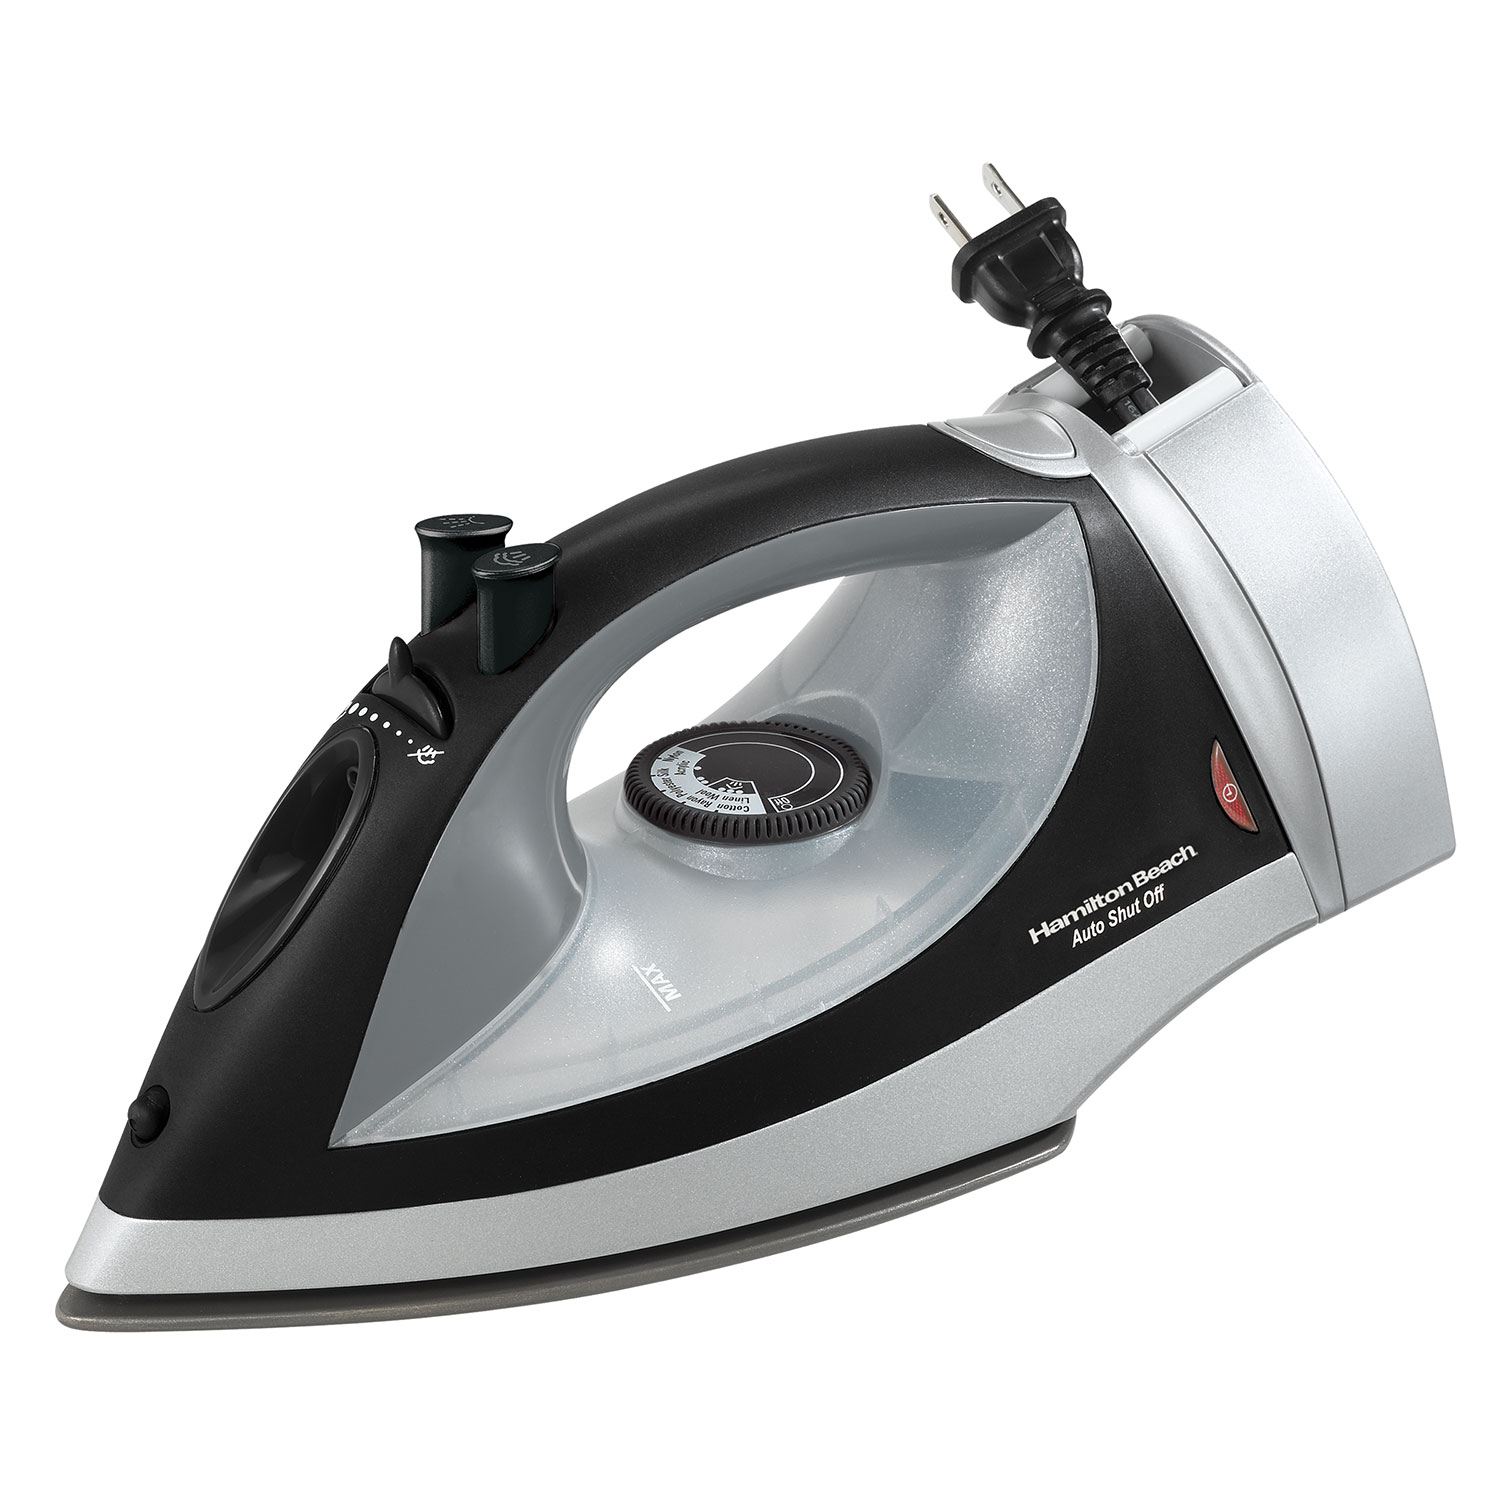 Nonstick Iron with Retractable Cord (14210R)